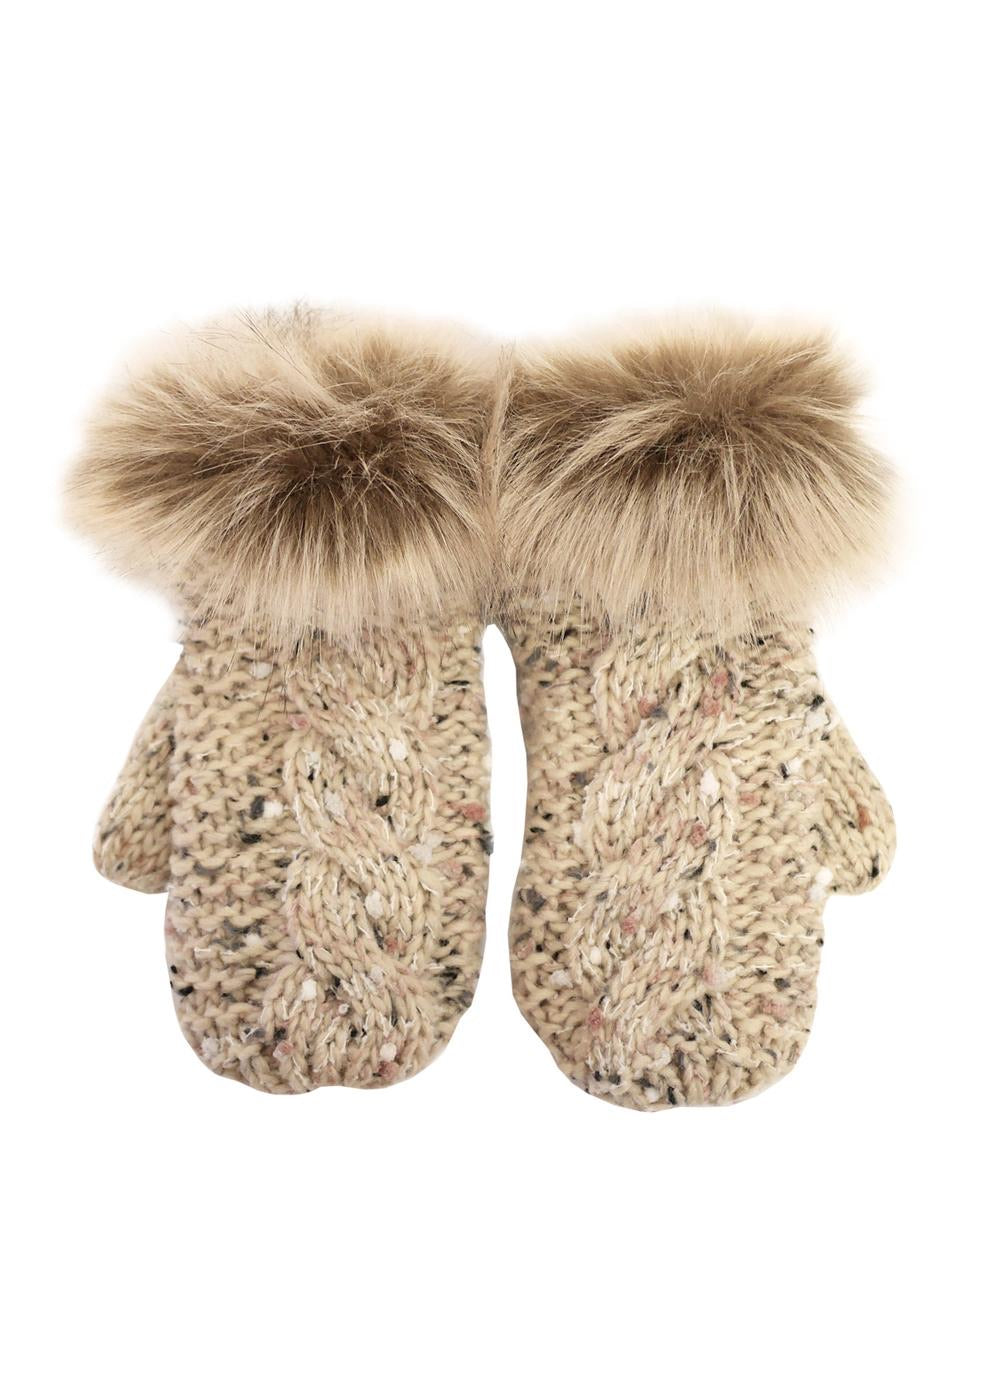 Oatmeal speckled knitted mittens with fur girls